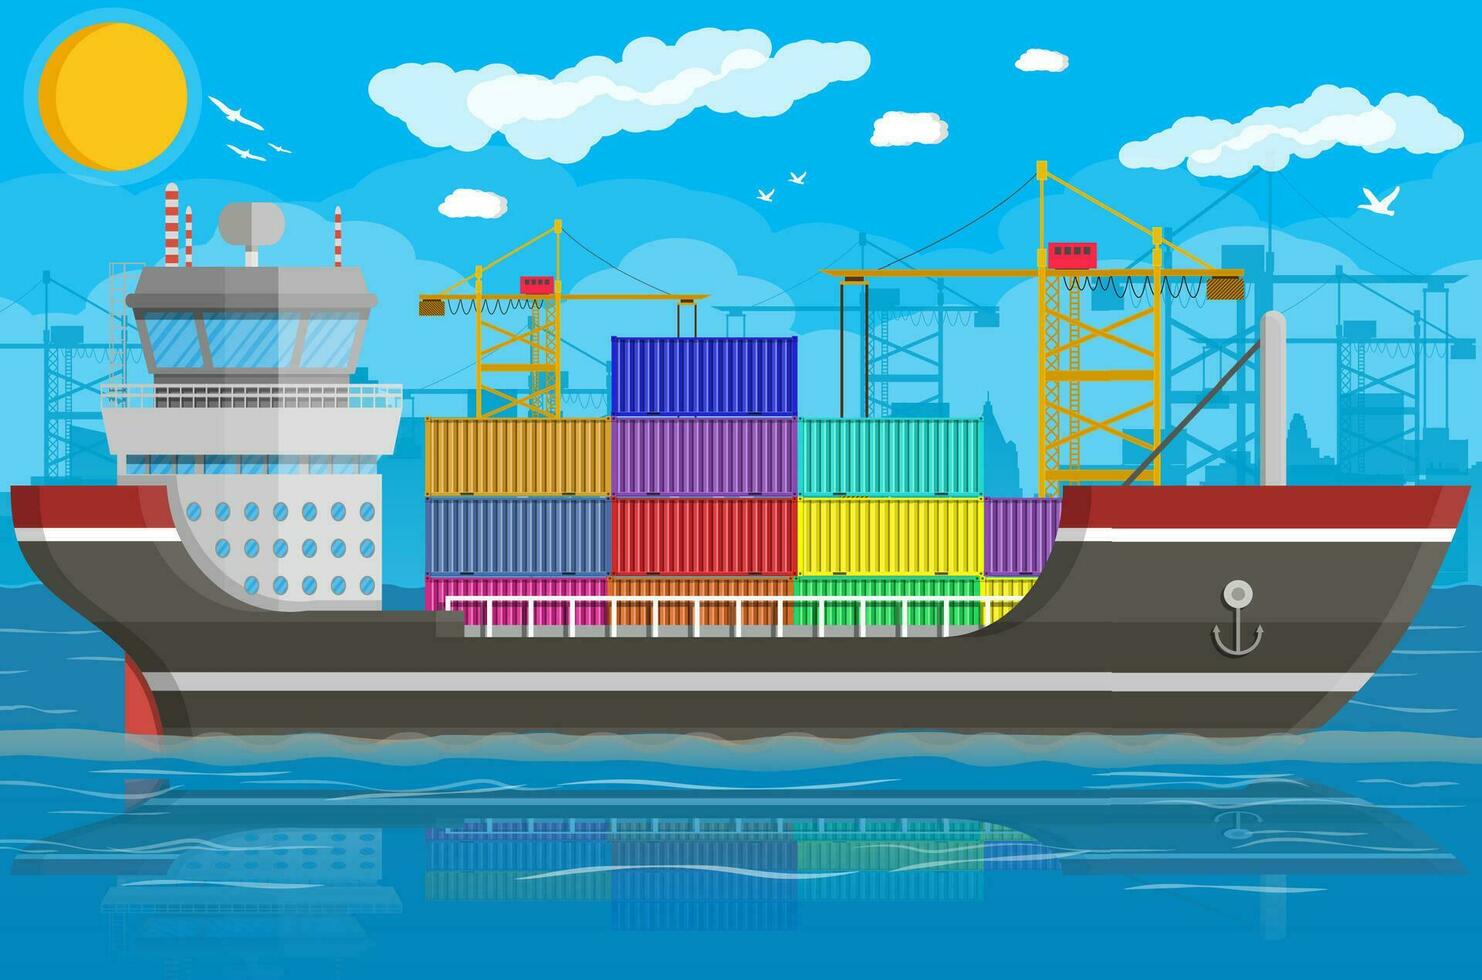 River ocean and sea freight shipping by water. Port crane unloads cargo ship. Background with blue sky, clouds. Pier, dock, harbor. Sea port logistics and delivery. Vector illustration in flat style